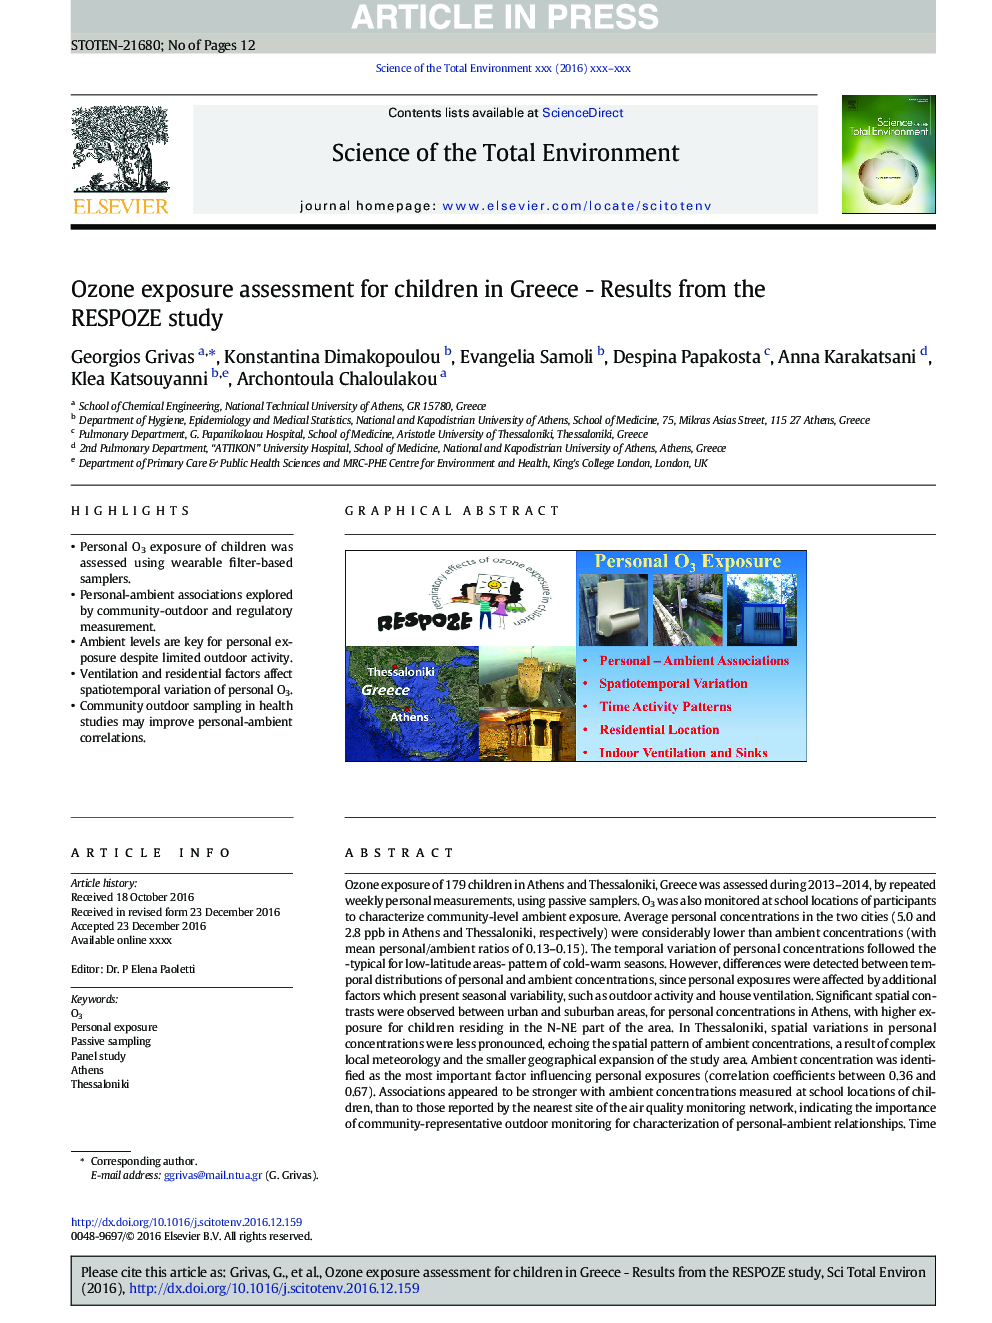 Ozone exposure assessment for children in Greece - Results from the RESPOZE study